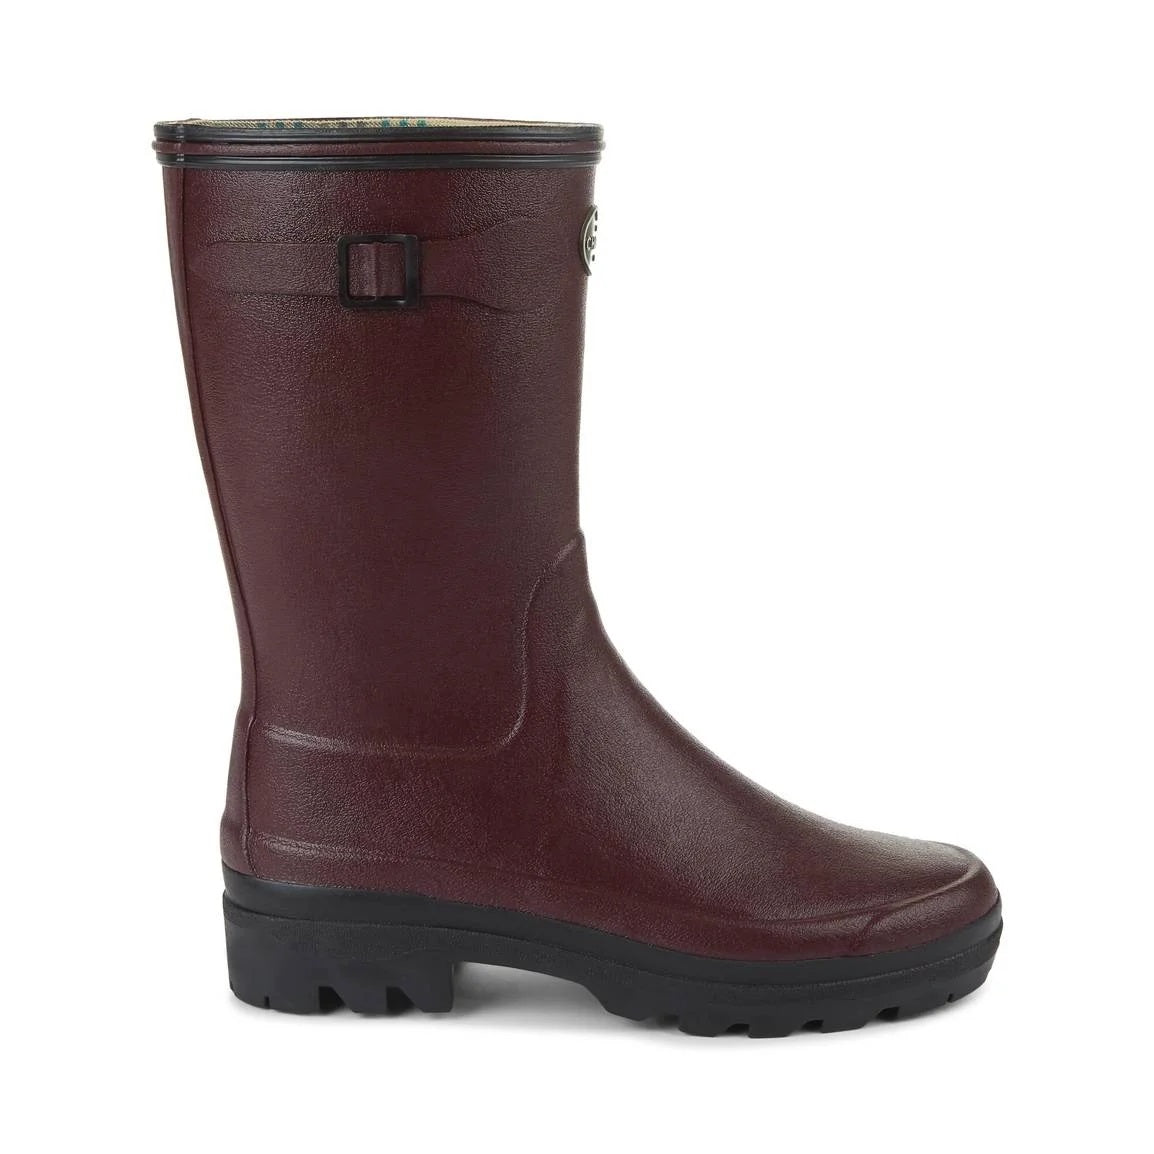 LE CHAMEAU Boots - Ladies Giverny Jersey Lined Bottillon - Cherry Red